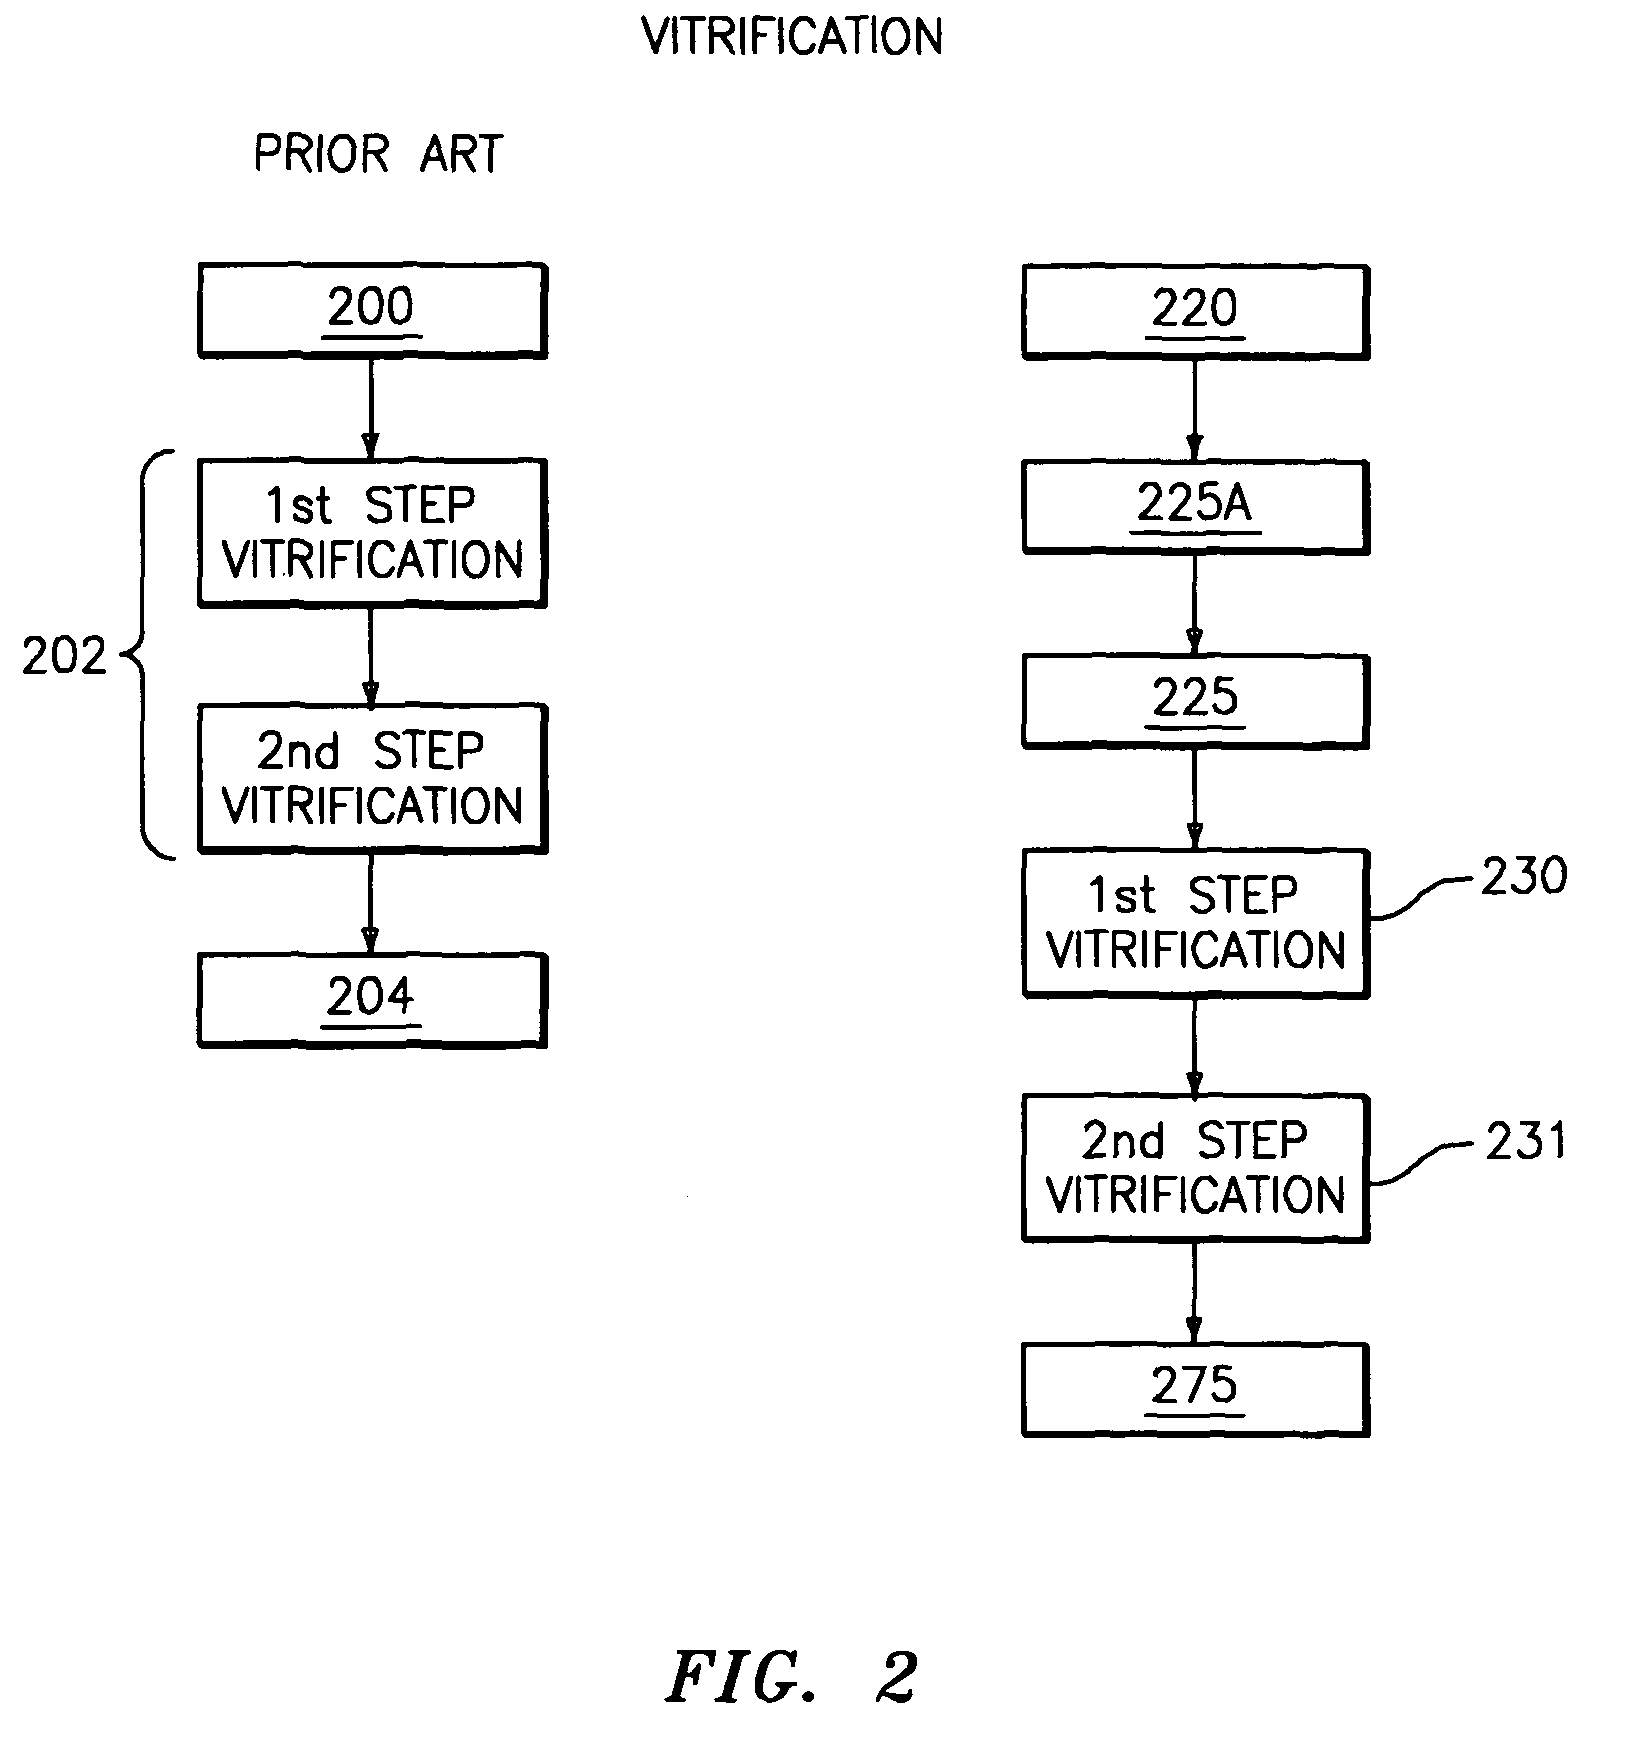 Media solutions and methods for cryopreservation and thawing of in vitro fertilization specimens